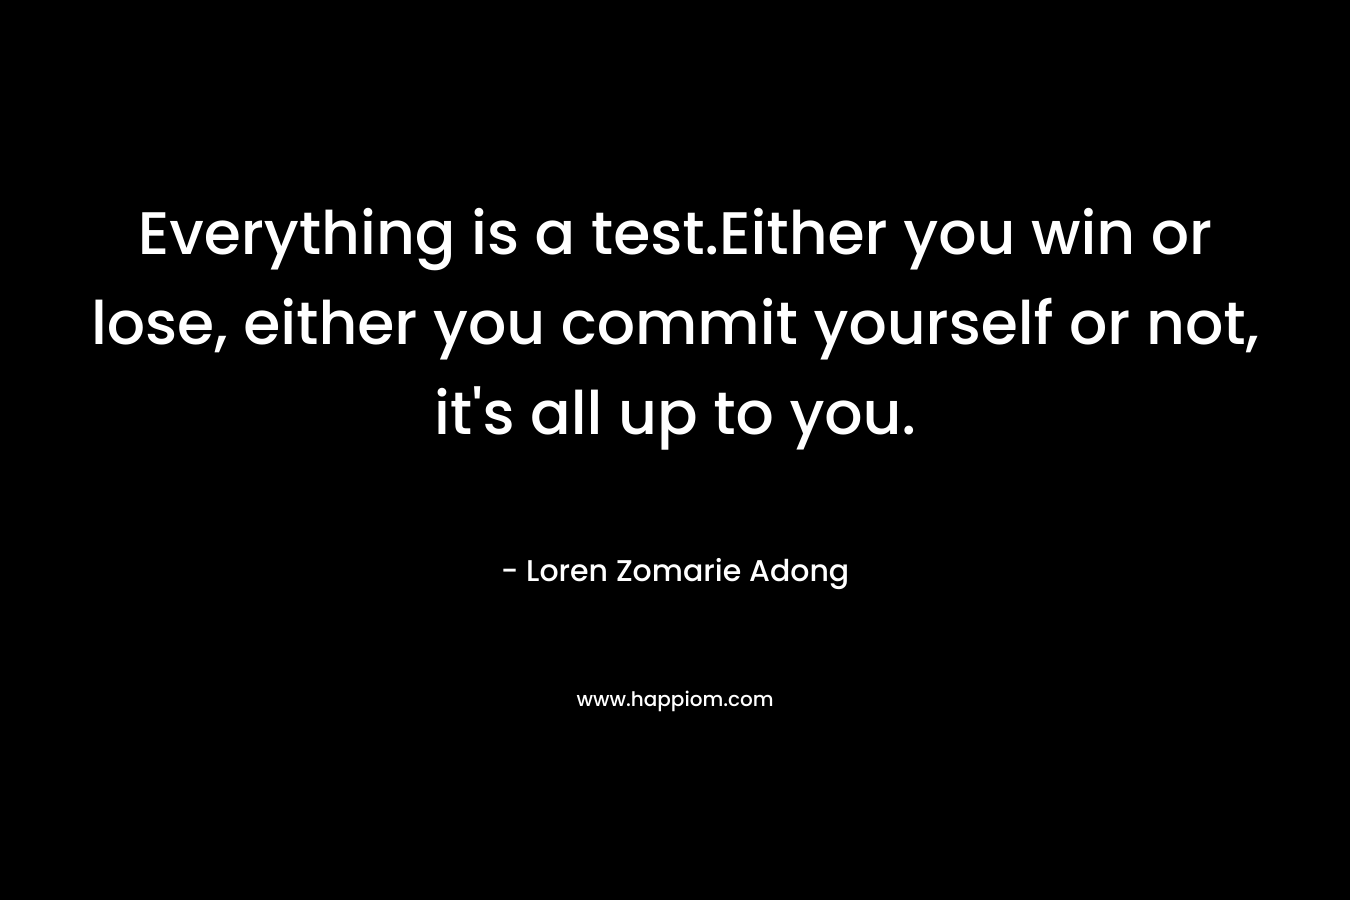 Everything is a test.Either you win or lose, either you commit yourself or not, it’s all up to you. – Loren Zomarie Adong